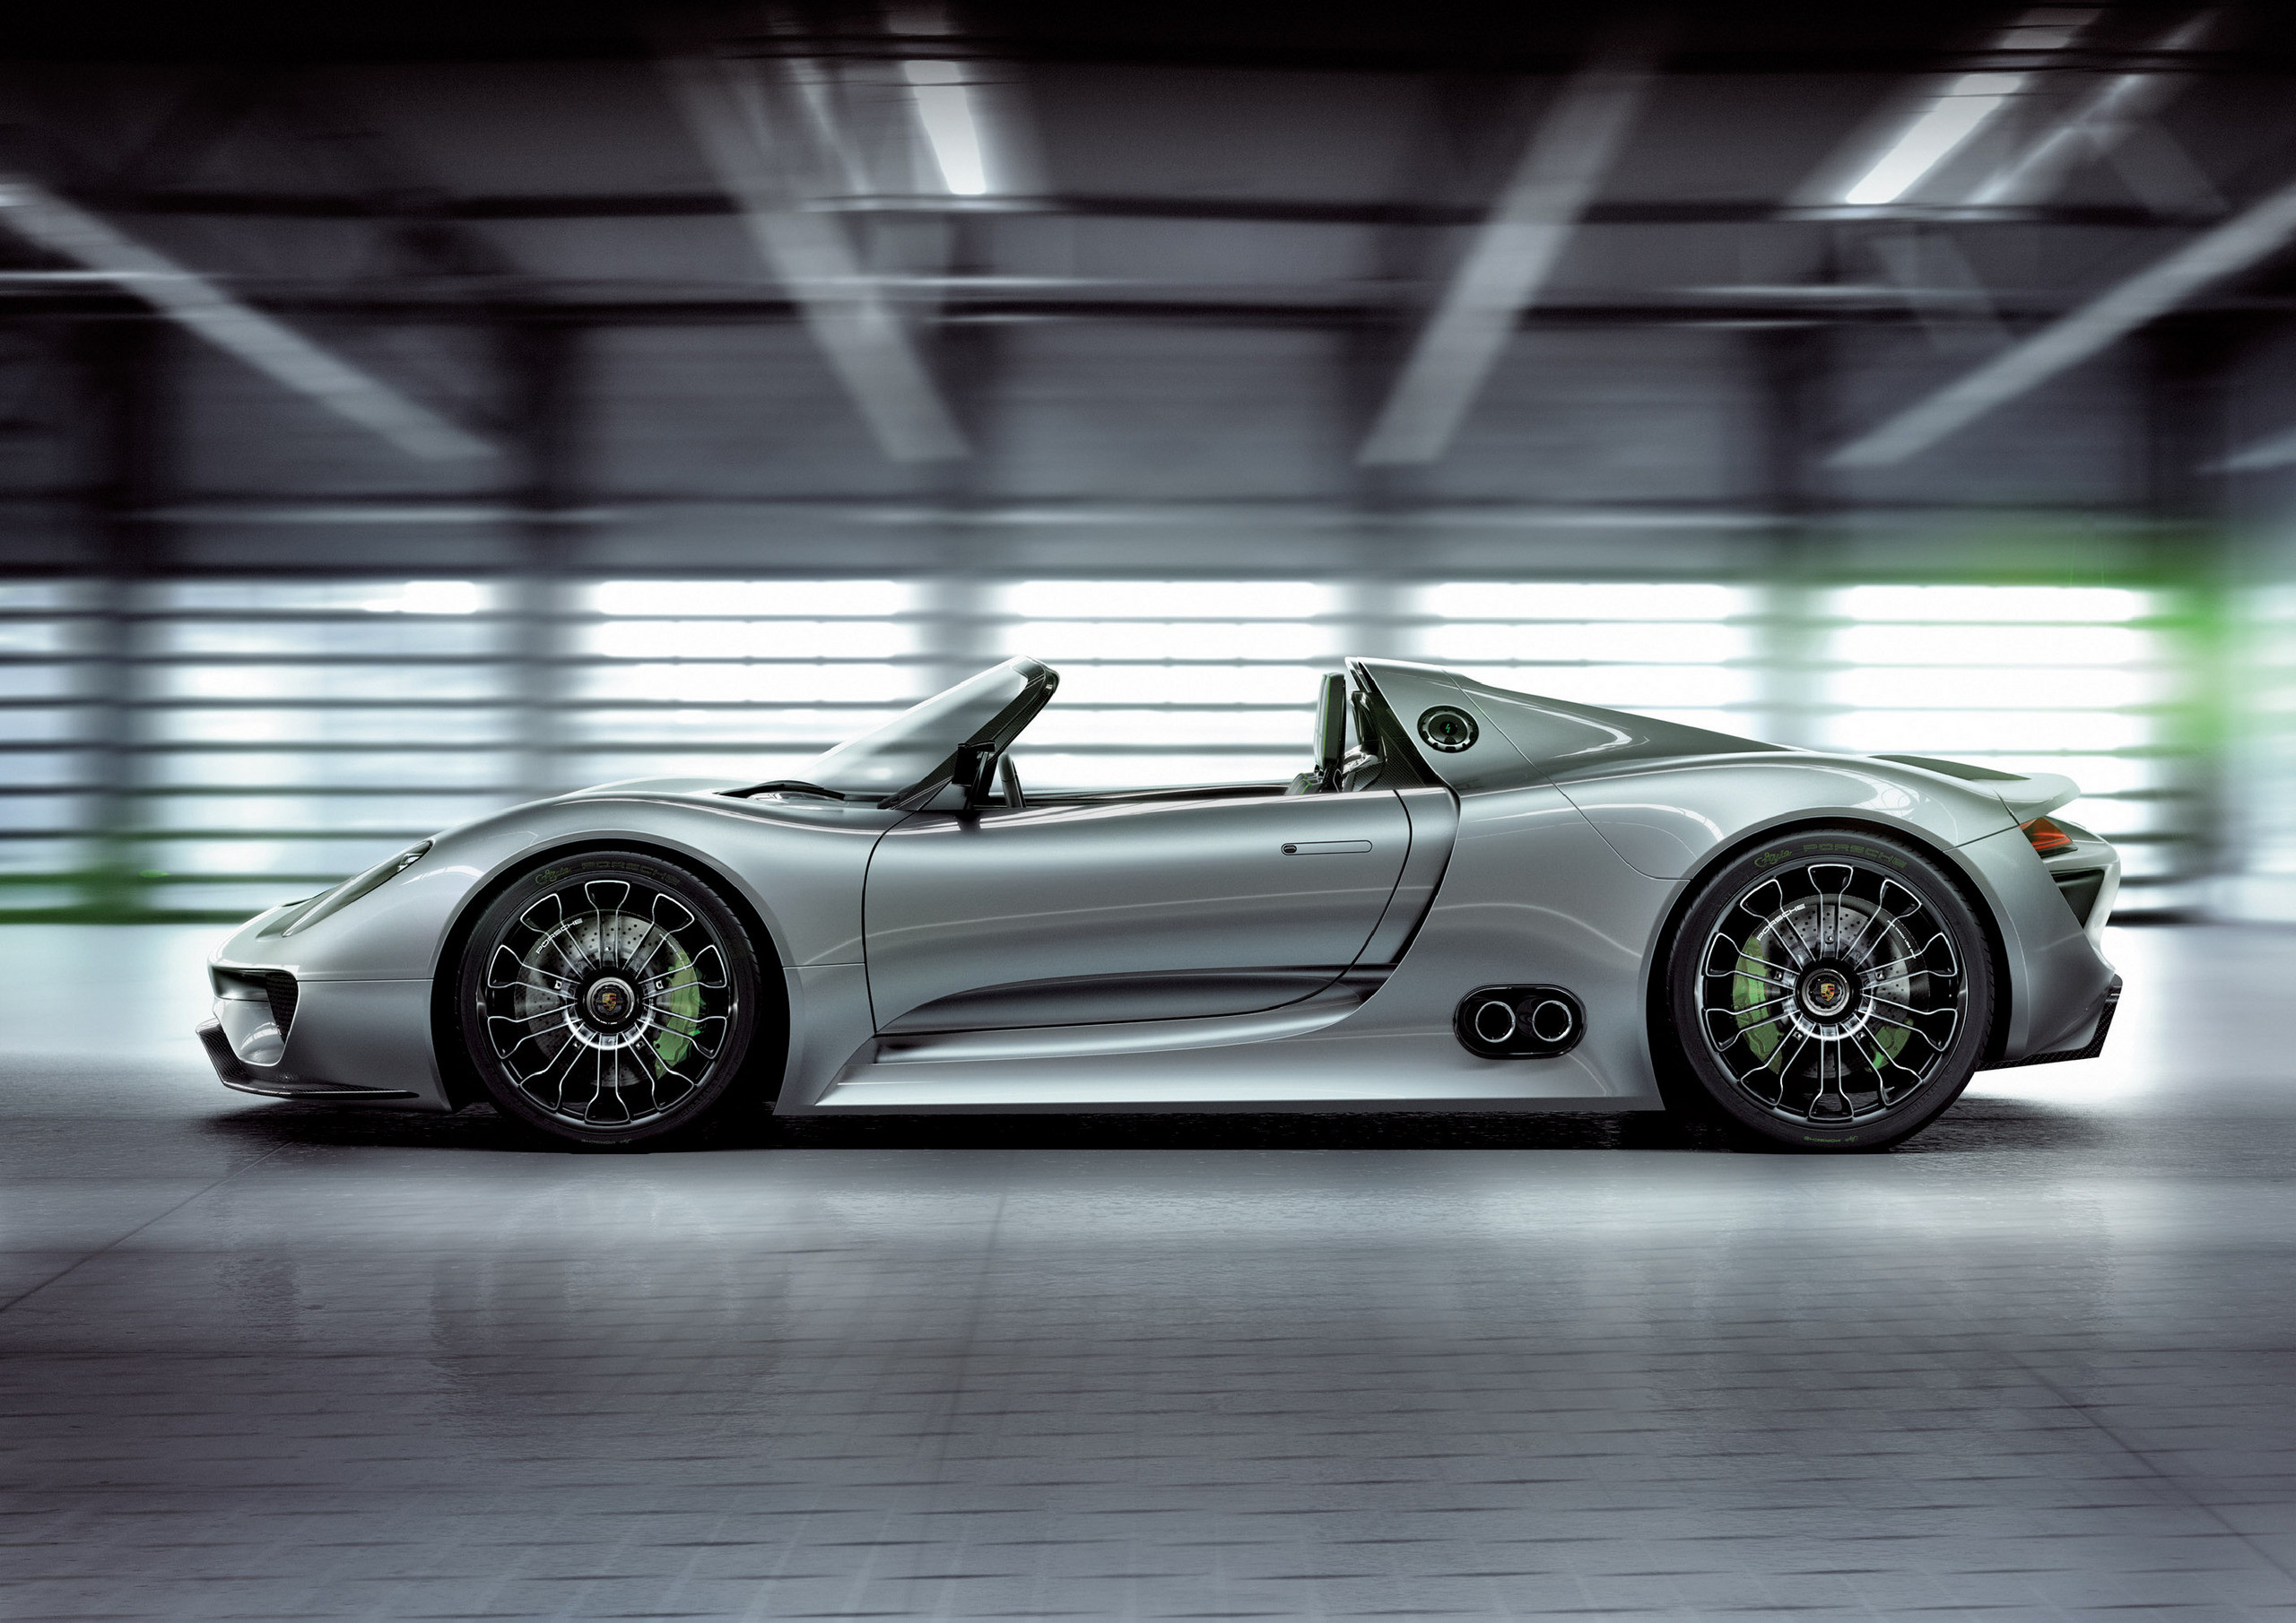 2560x1810 Exotic Cars images Porsche 918 Spyder HD wallpaper and background photos